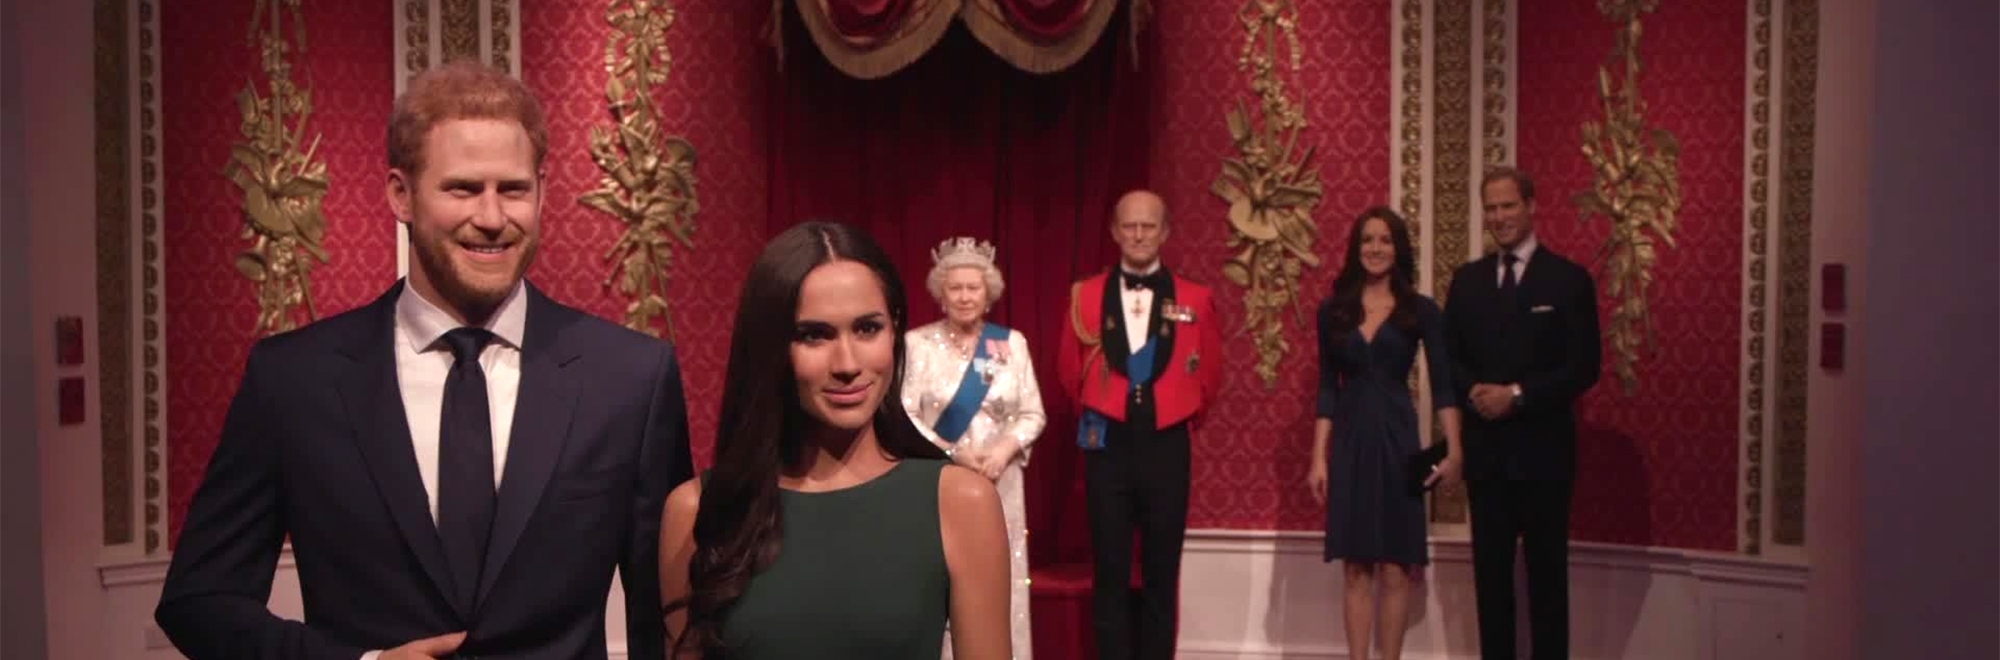 A quick fire, low budget move from Madame Tussauds showcases PR hijacking at its finest